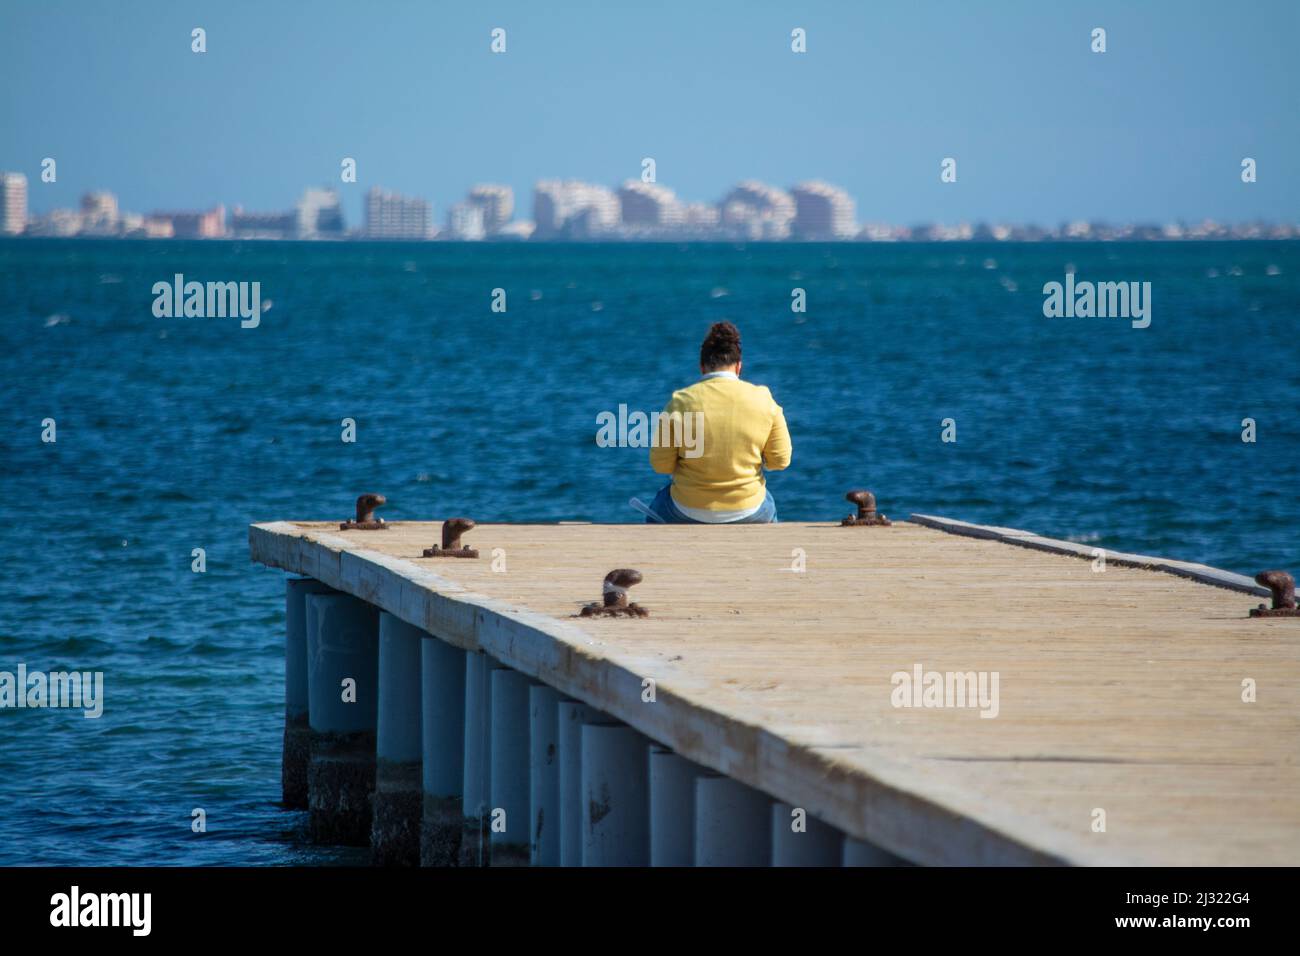 Person in a yellow shirt sitting on the edge of a jetty in the Mar Menor Stock Photo